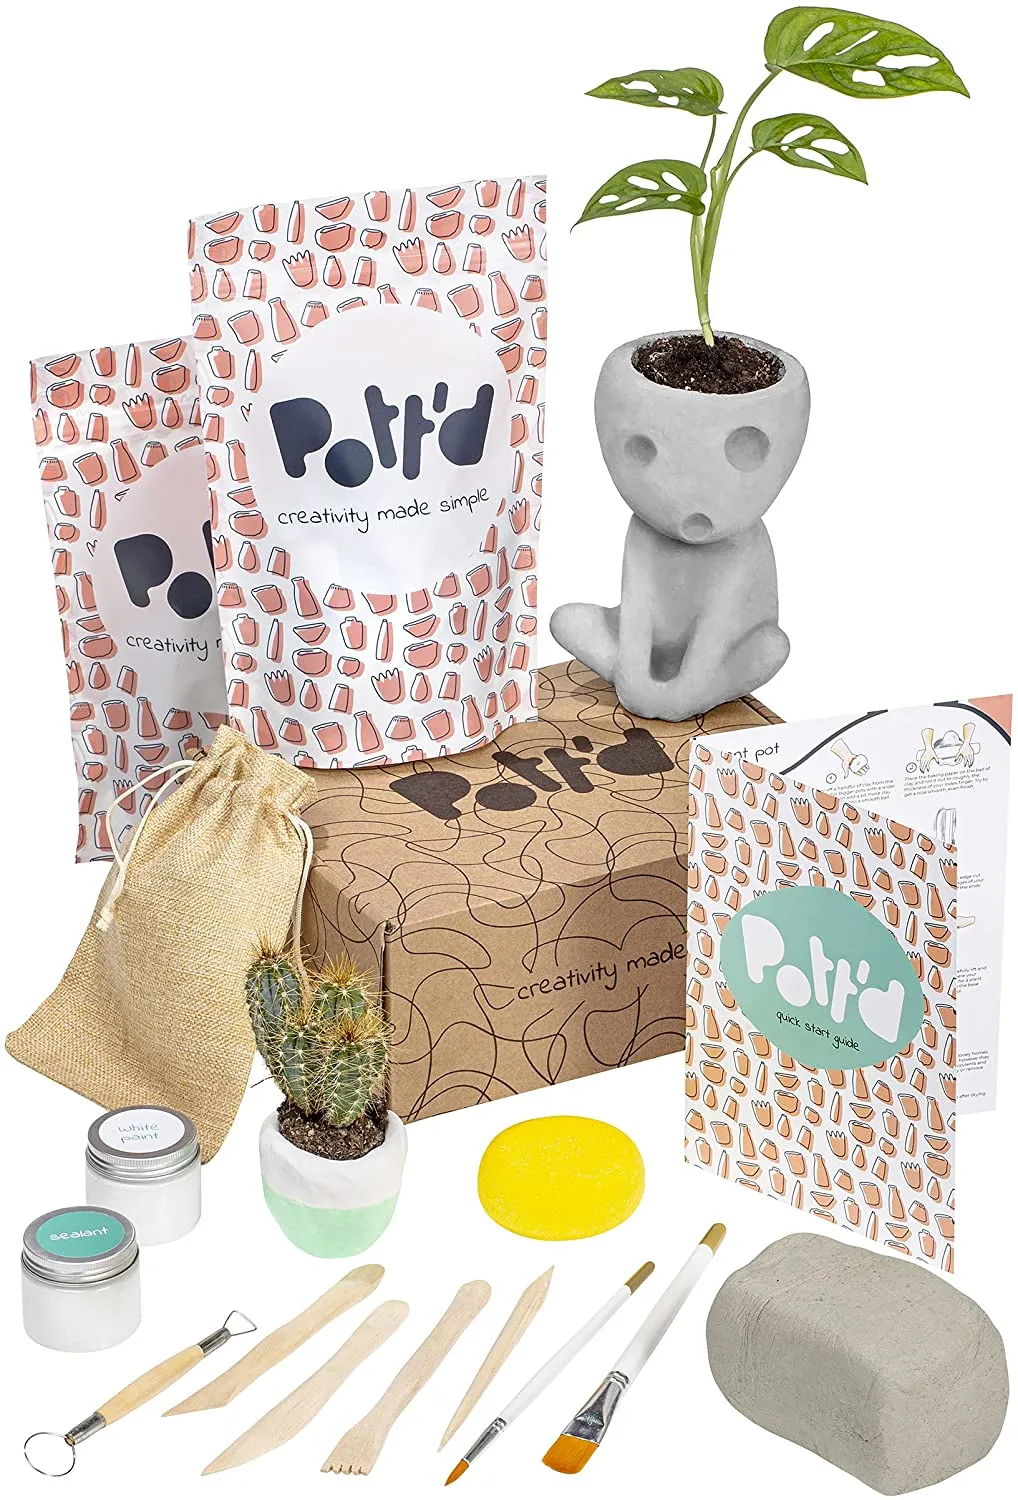 Sculpd Pottery Kit  The Original Air Dry Clay Starter Kit